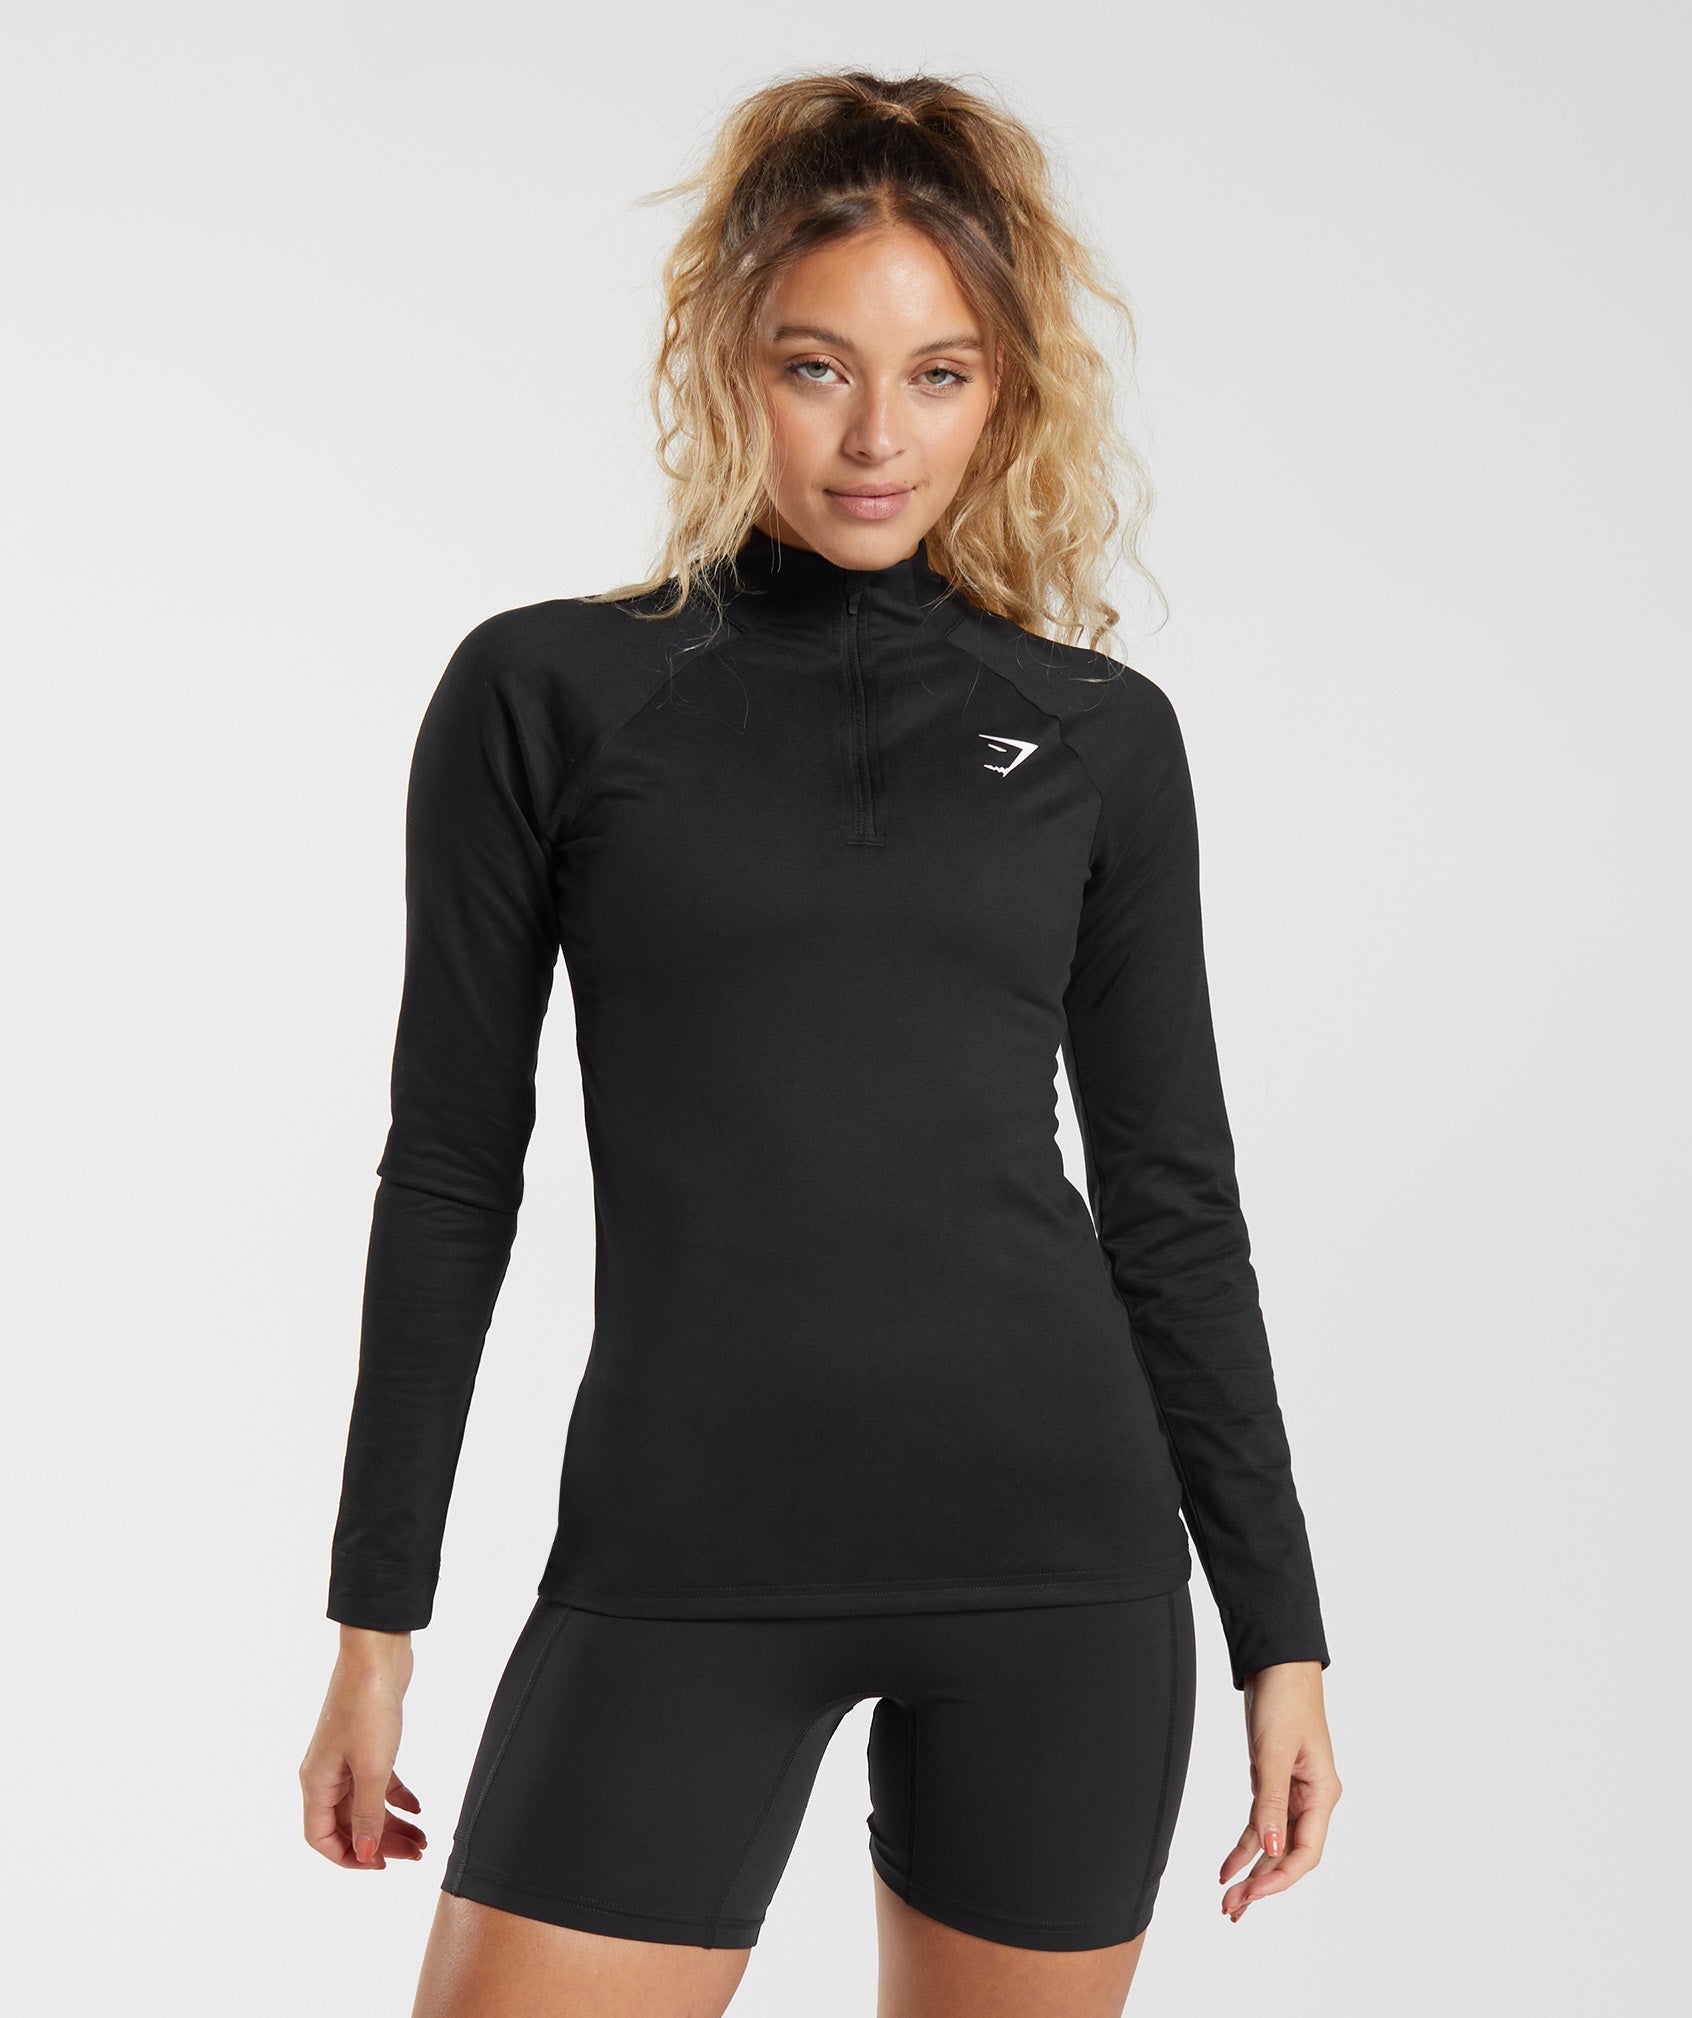 Gym Pullovers for Women - Gymshark